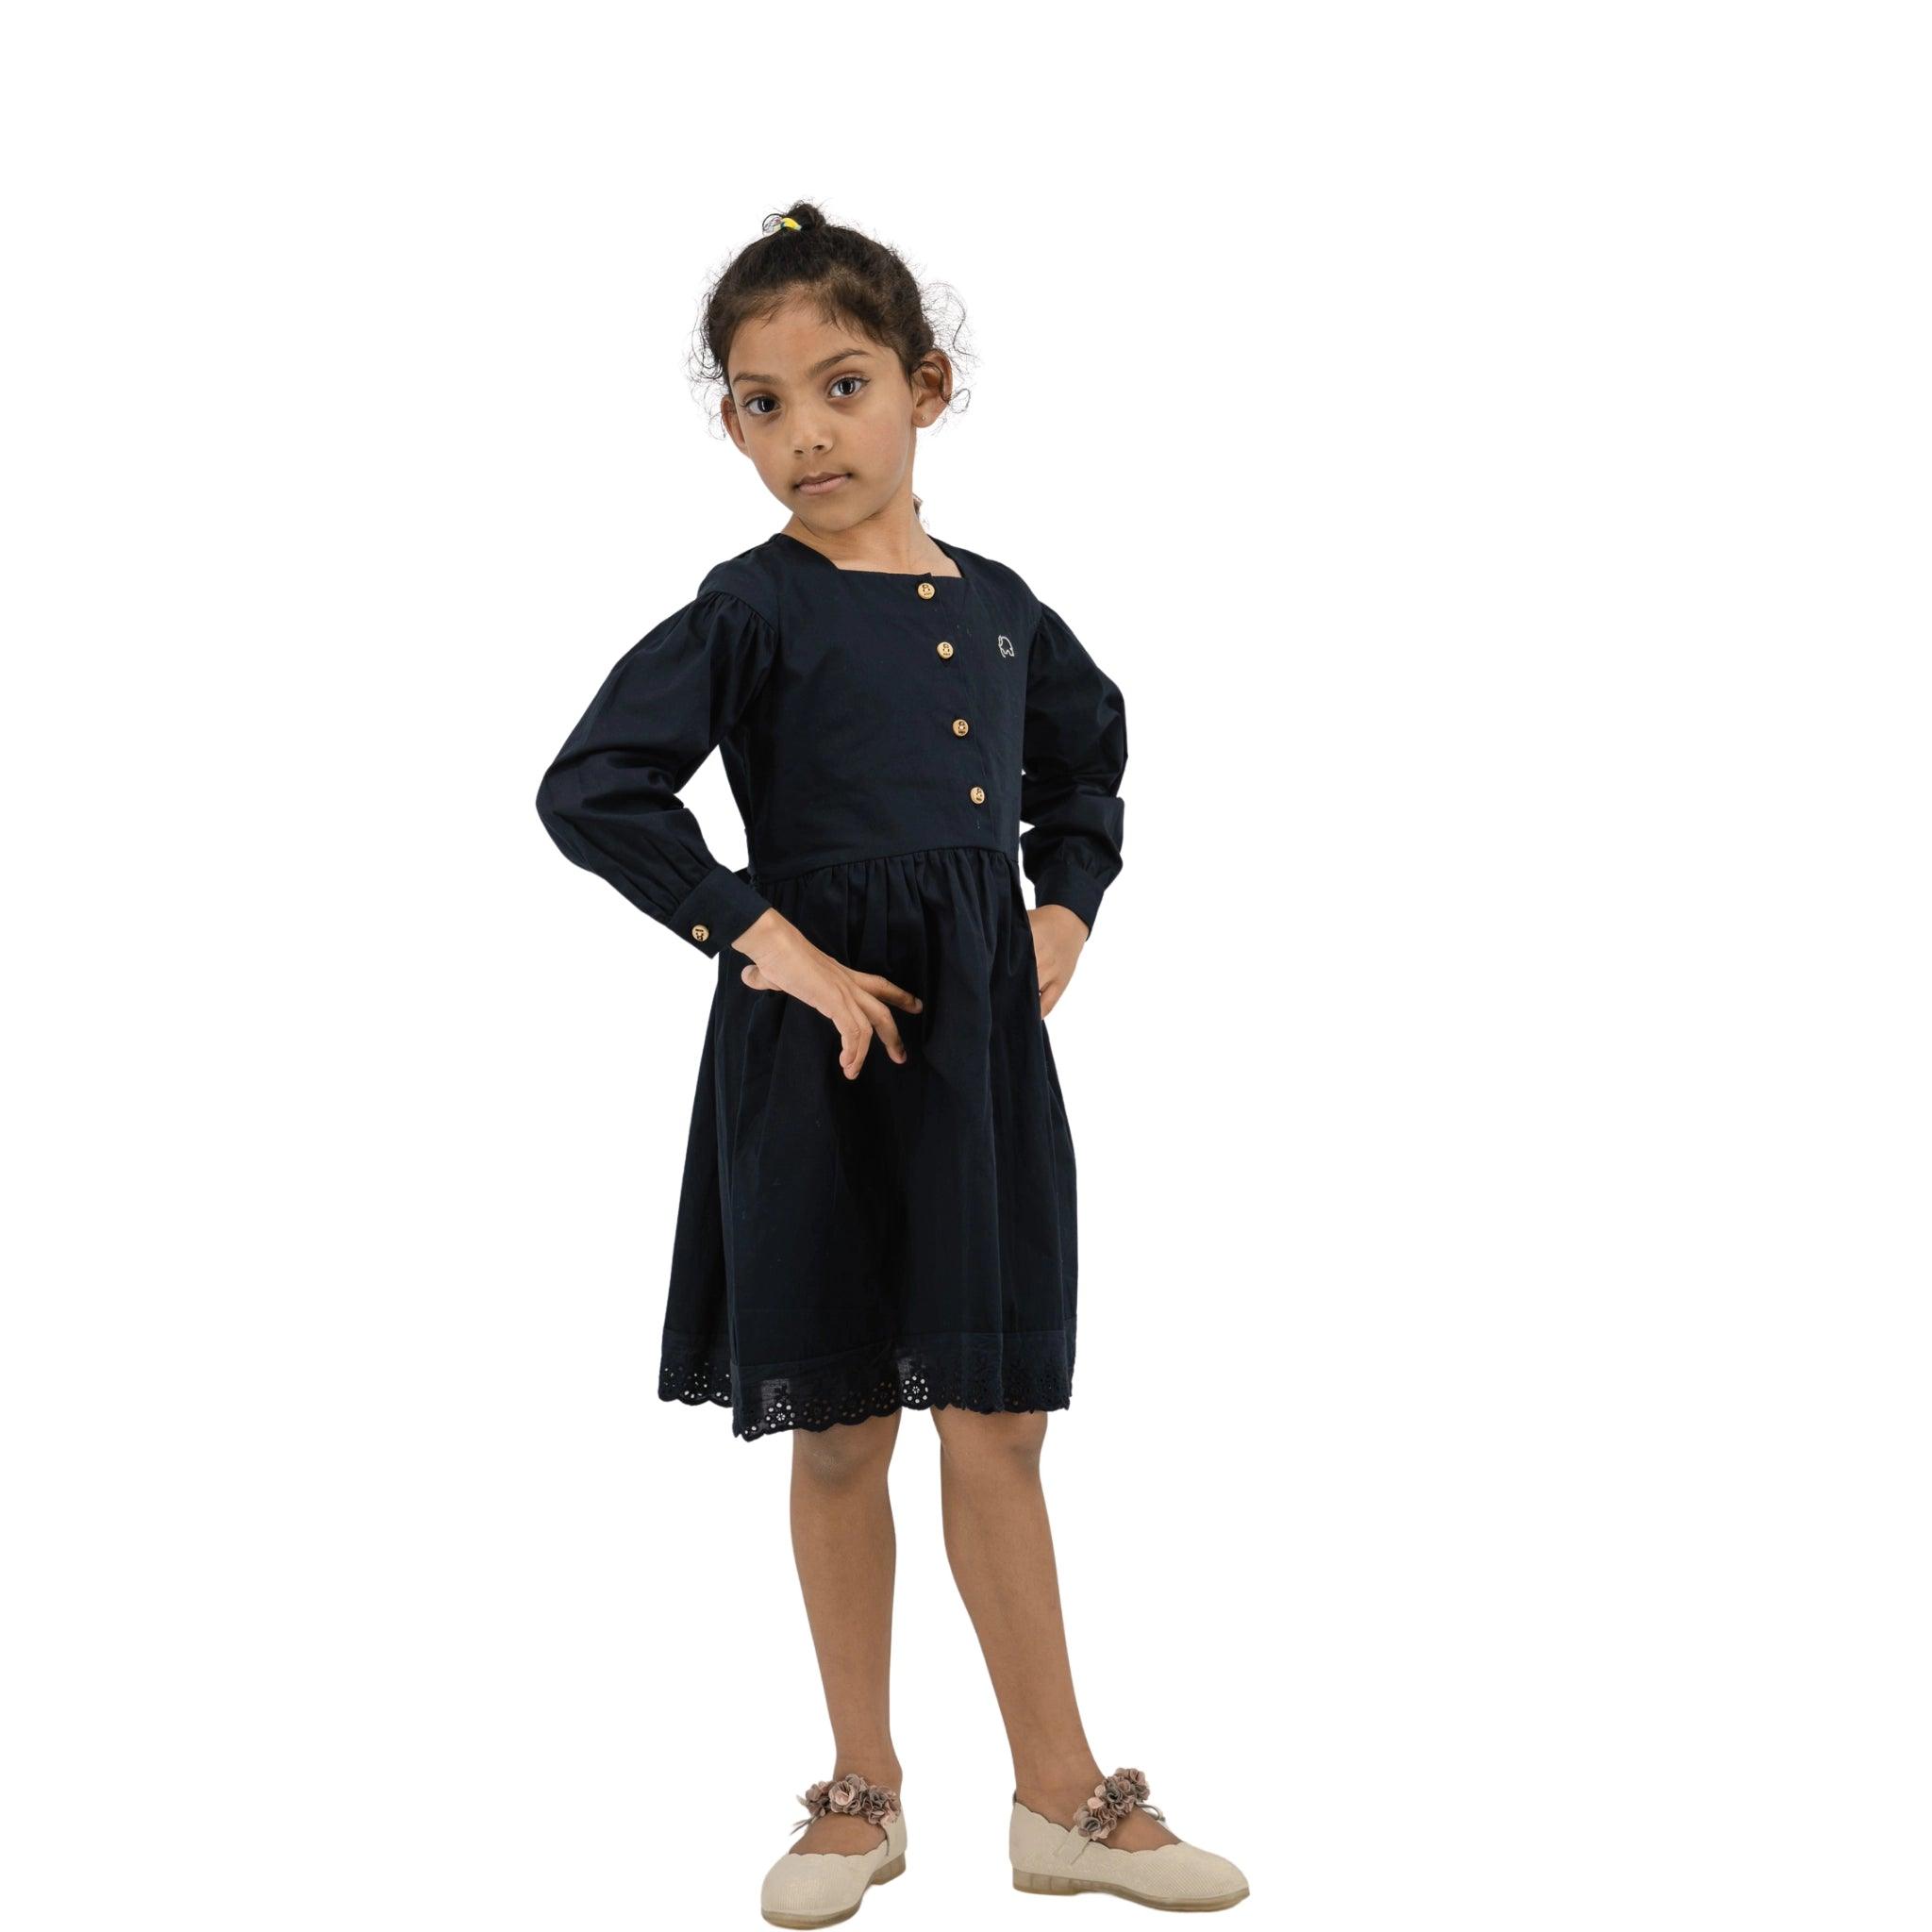 Young girl in a navy blue dress with long puff sleeves and beige shoes standing confidently with hands on hips against a white background.